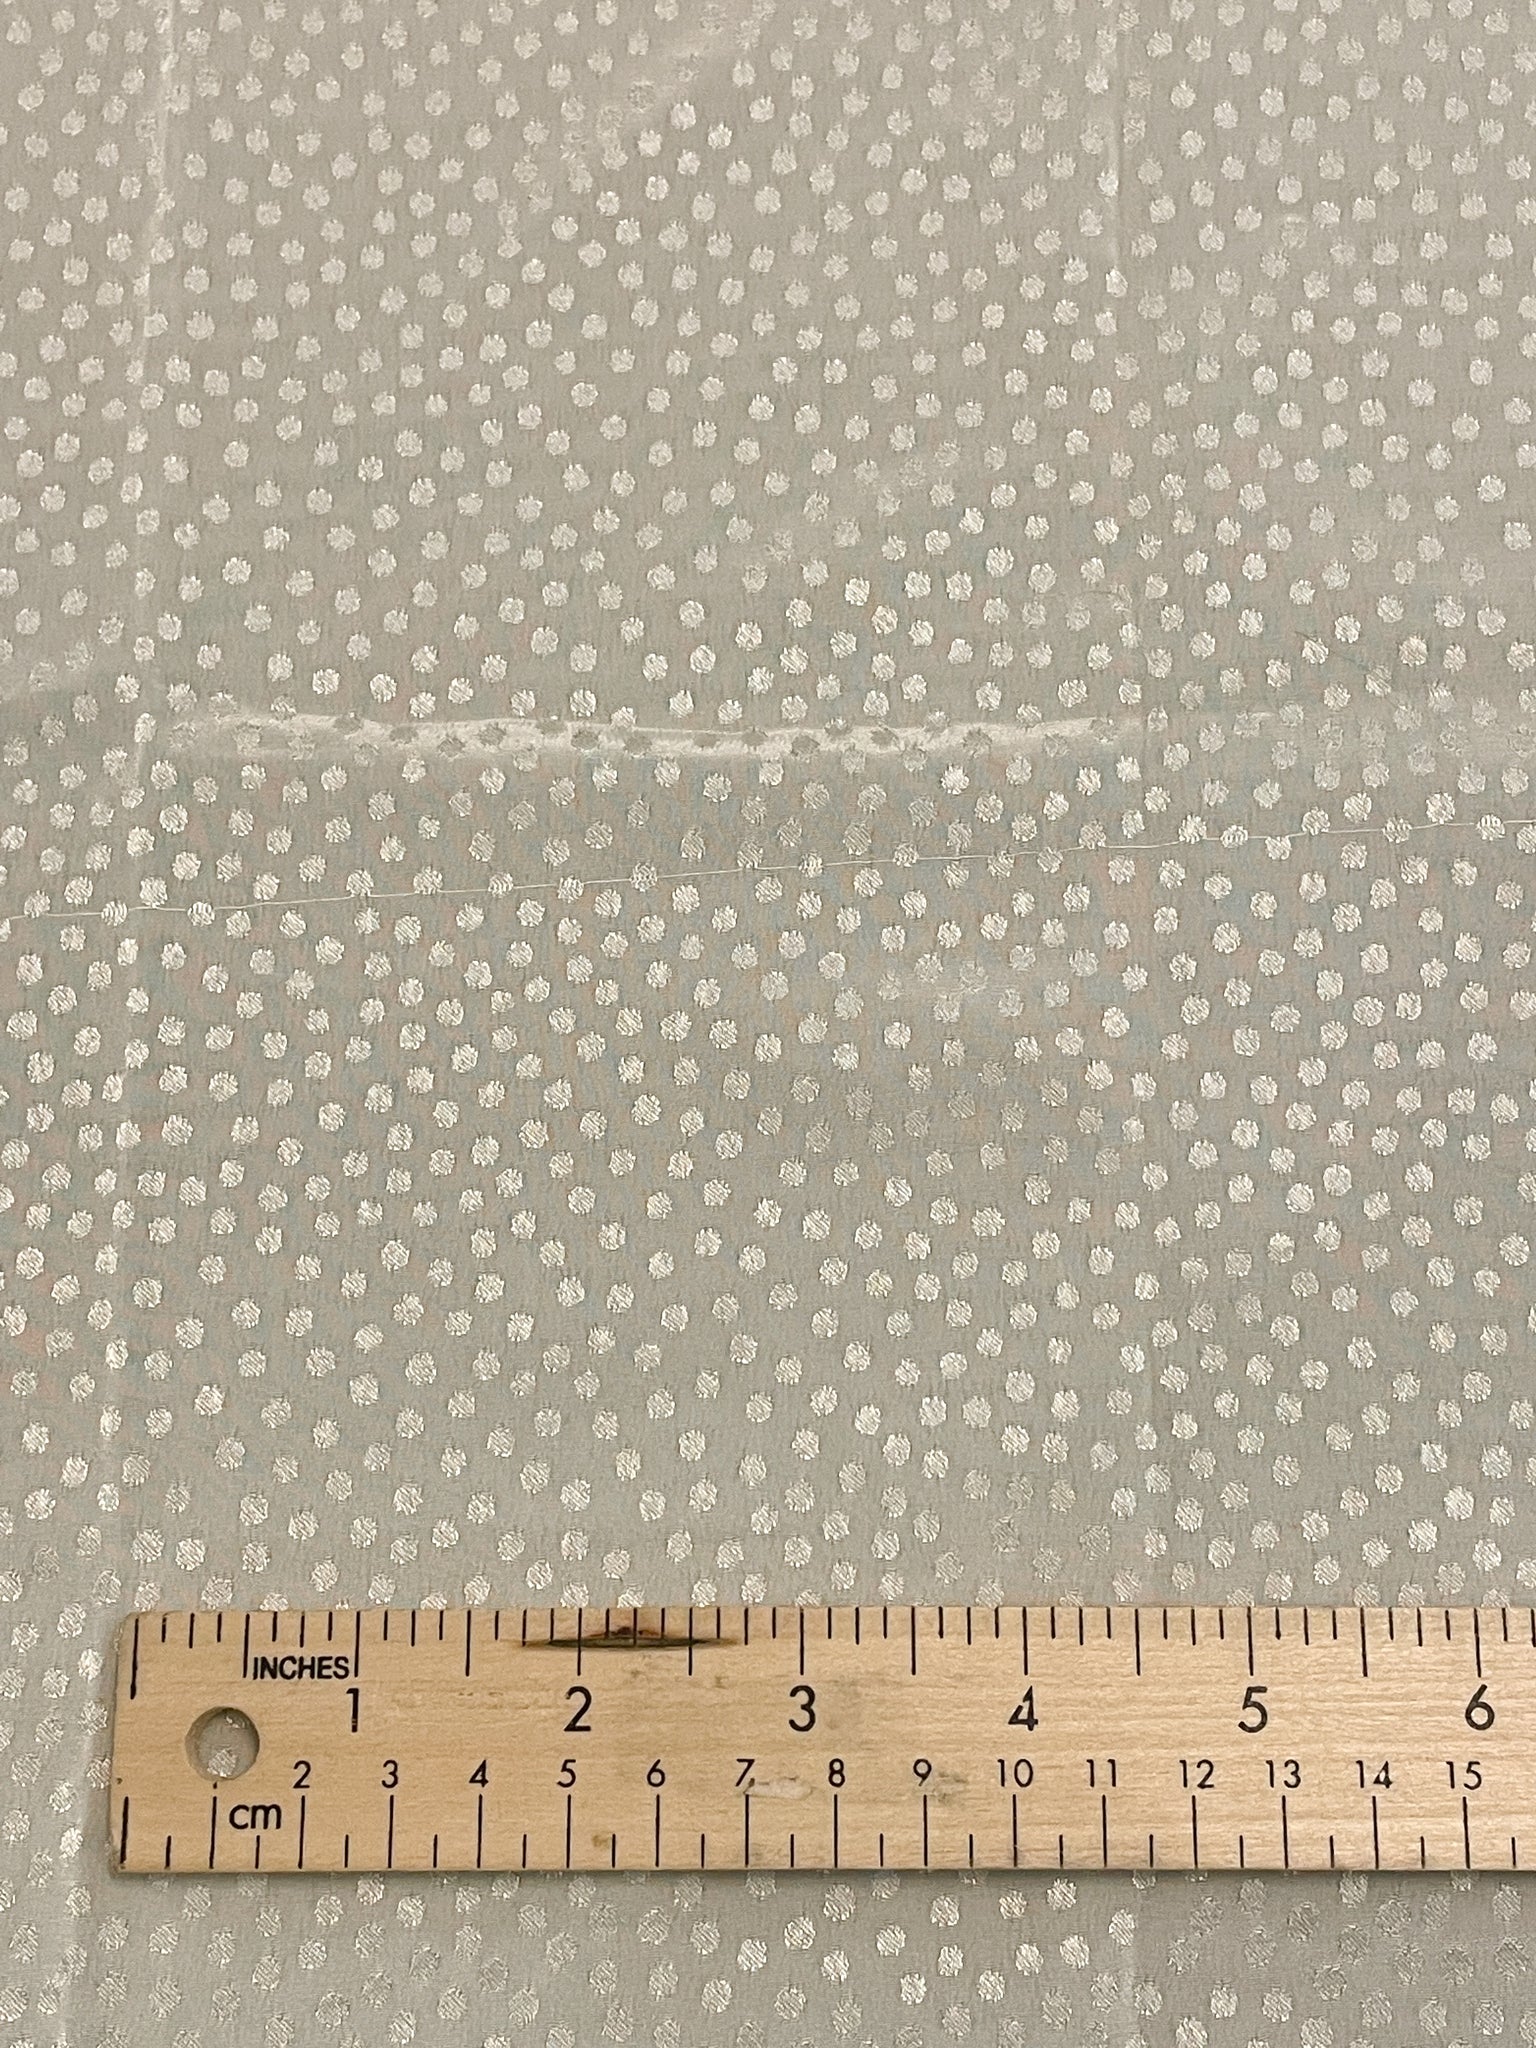 SALE 1 1/3 YD Polyester Jacquard - Off White with Small Polka Dots